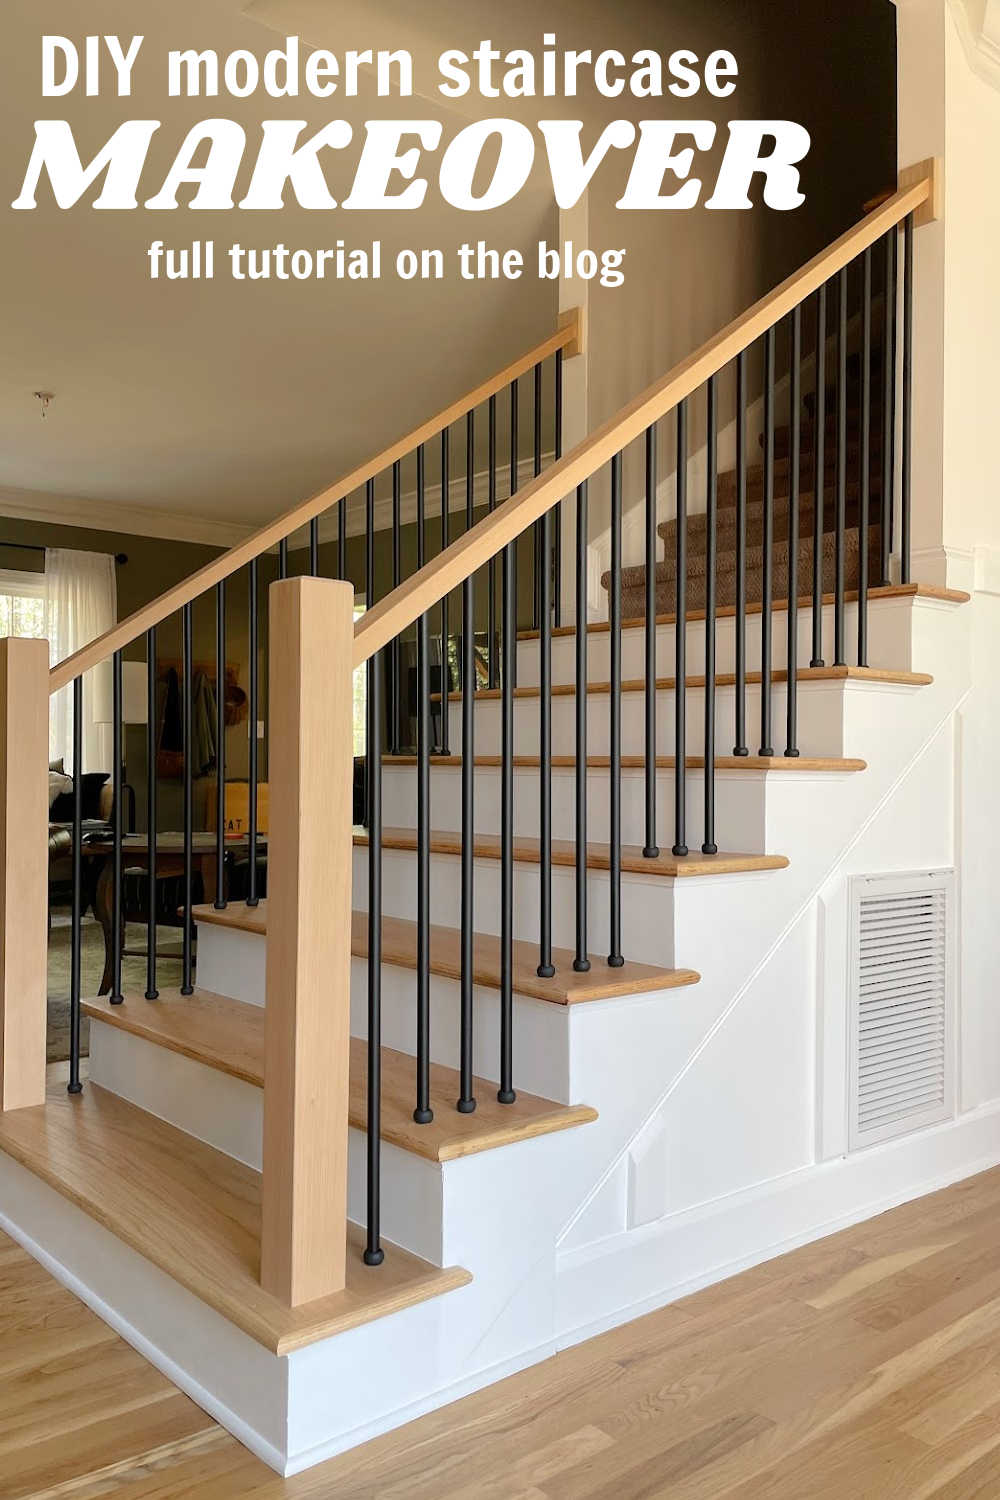 Modern Staircase Makeover Pinterest graphic